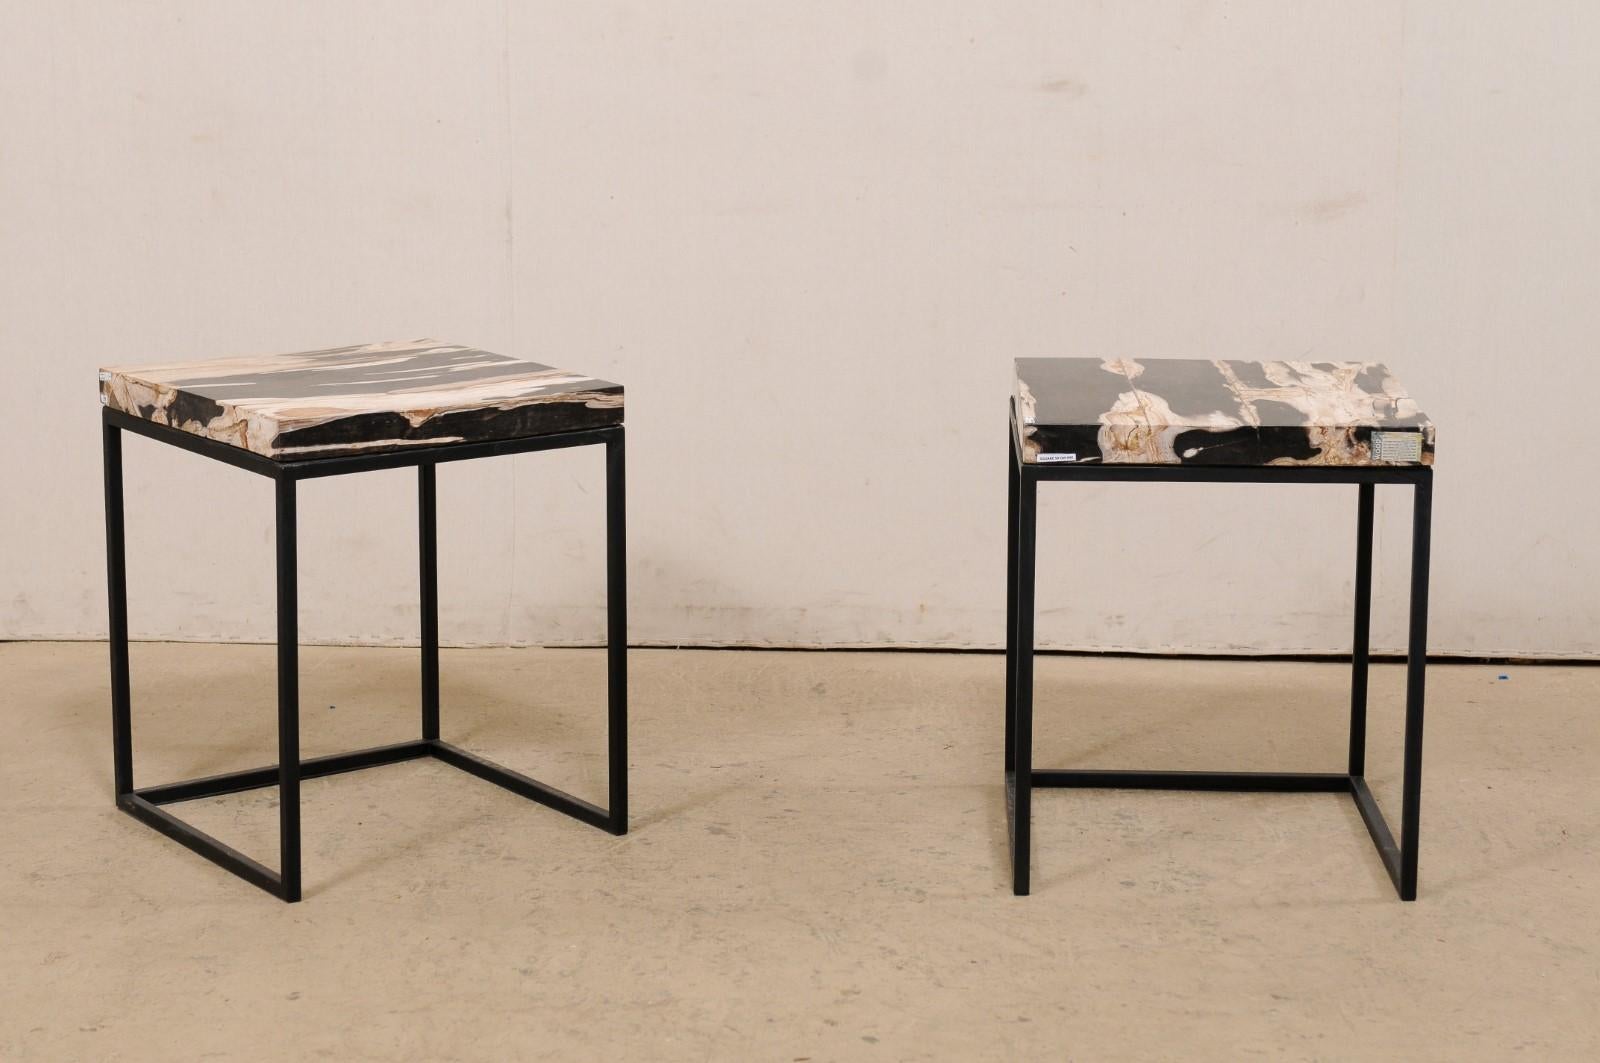 A pair of modern style custom created petrified wood top and iron side tables. This pair of tables each feature a square-shaped petrified wood top, in shades of black, tan, and off-white. The tops are supported by a custom metal base, which is black